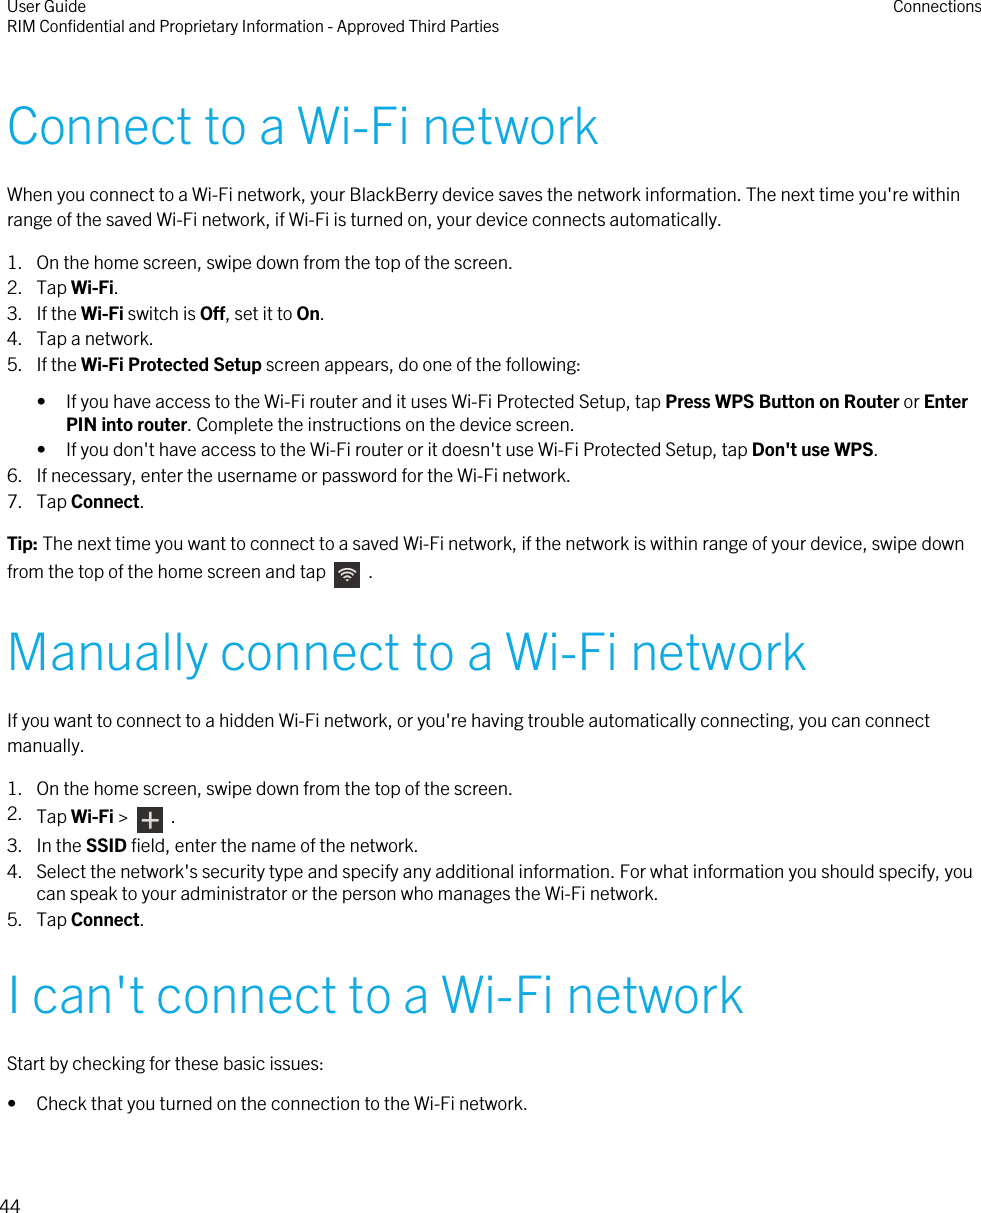 Connect to a Wi-Fi networkWhen you connect to a Wi-Fi network, your BlackBerry device saves the network information. The next time you&apos;re withinrange of the saved Wi-Fi network, if Wi-Fi is turned on, your device connects automatically.1. On the home screen, swipe down from the top of the screen.2. Tap Wi-Fi.3. If the Wi-Fi switch is Off, set it to On.4. Tap a network.5. If the Wi-Fi Protected Setup screen appears, do one of the following:• If you have access to the Wi-Fi router and it uses Wi-Fi Protected Setup, tap Press WPS Button on Router or EnterPIN into router. Complete the instructions on the device screen.• If you don&apos;t have access to the Wi-Fi router or it doesn&apos;t use Wi-Fi Protected Setup, tap Don&apos;t use WPS.6. If necessary, enter the username or password for the Wi-Fi network.7. Tap Connect.Tip: The next time you want to connect to a saved Wi-Fi network, if the network is within range of your device, swipe downfrom the top of the home screen and tap    .Manually connect to a Wi-Fi networkIf you want to connect to a hidden Wi-Fi network, or you&apos;re having trouble automatically connecting, you can connectmanually.1. On the home screen, swipe down from the top of the screen.2. Tap Wi-Fi &gt;    .3. In the SSID field, enter the name of the network.4. Select the network&apos;s security type and specify any additional information. For what information you should specify, youcan speak to your administrator or the person who manages the Wi-Fi network.5. Tap Connect.I can&apos;t connect to a Wi-Fi networkStart by checking for these basic issues:• Check that you turned on the connection to the Wi-Fi network.User GuideRIM Confidential and Proprietary Information - Approved Third Parties Connections44